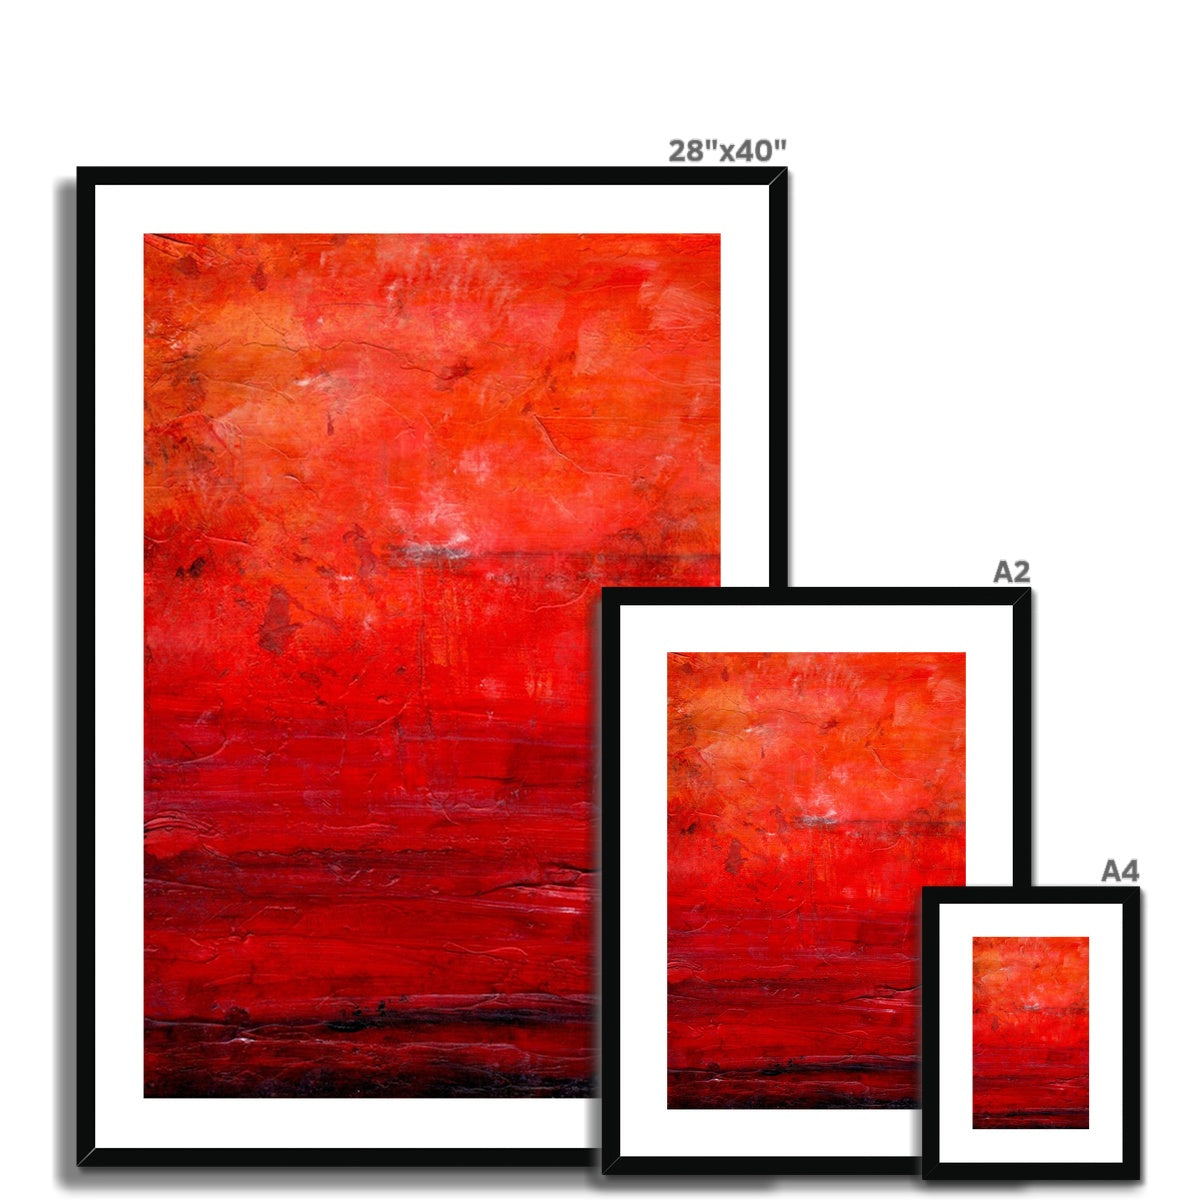 Abstract Summer Painting | Framed & Mounted Prints From Scotland-Framed & Mounted Prints-Abstract & Impressionistic Art Gallery-Paintings, Prints, Homeware, Art Gifts From Scotland By Scottish Artist Kevin Hunter